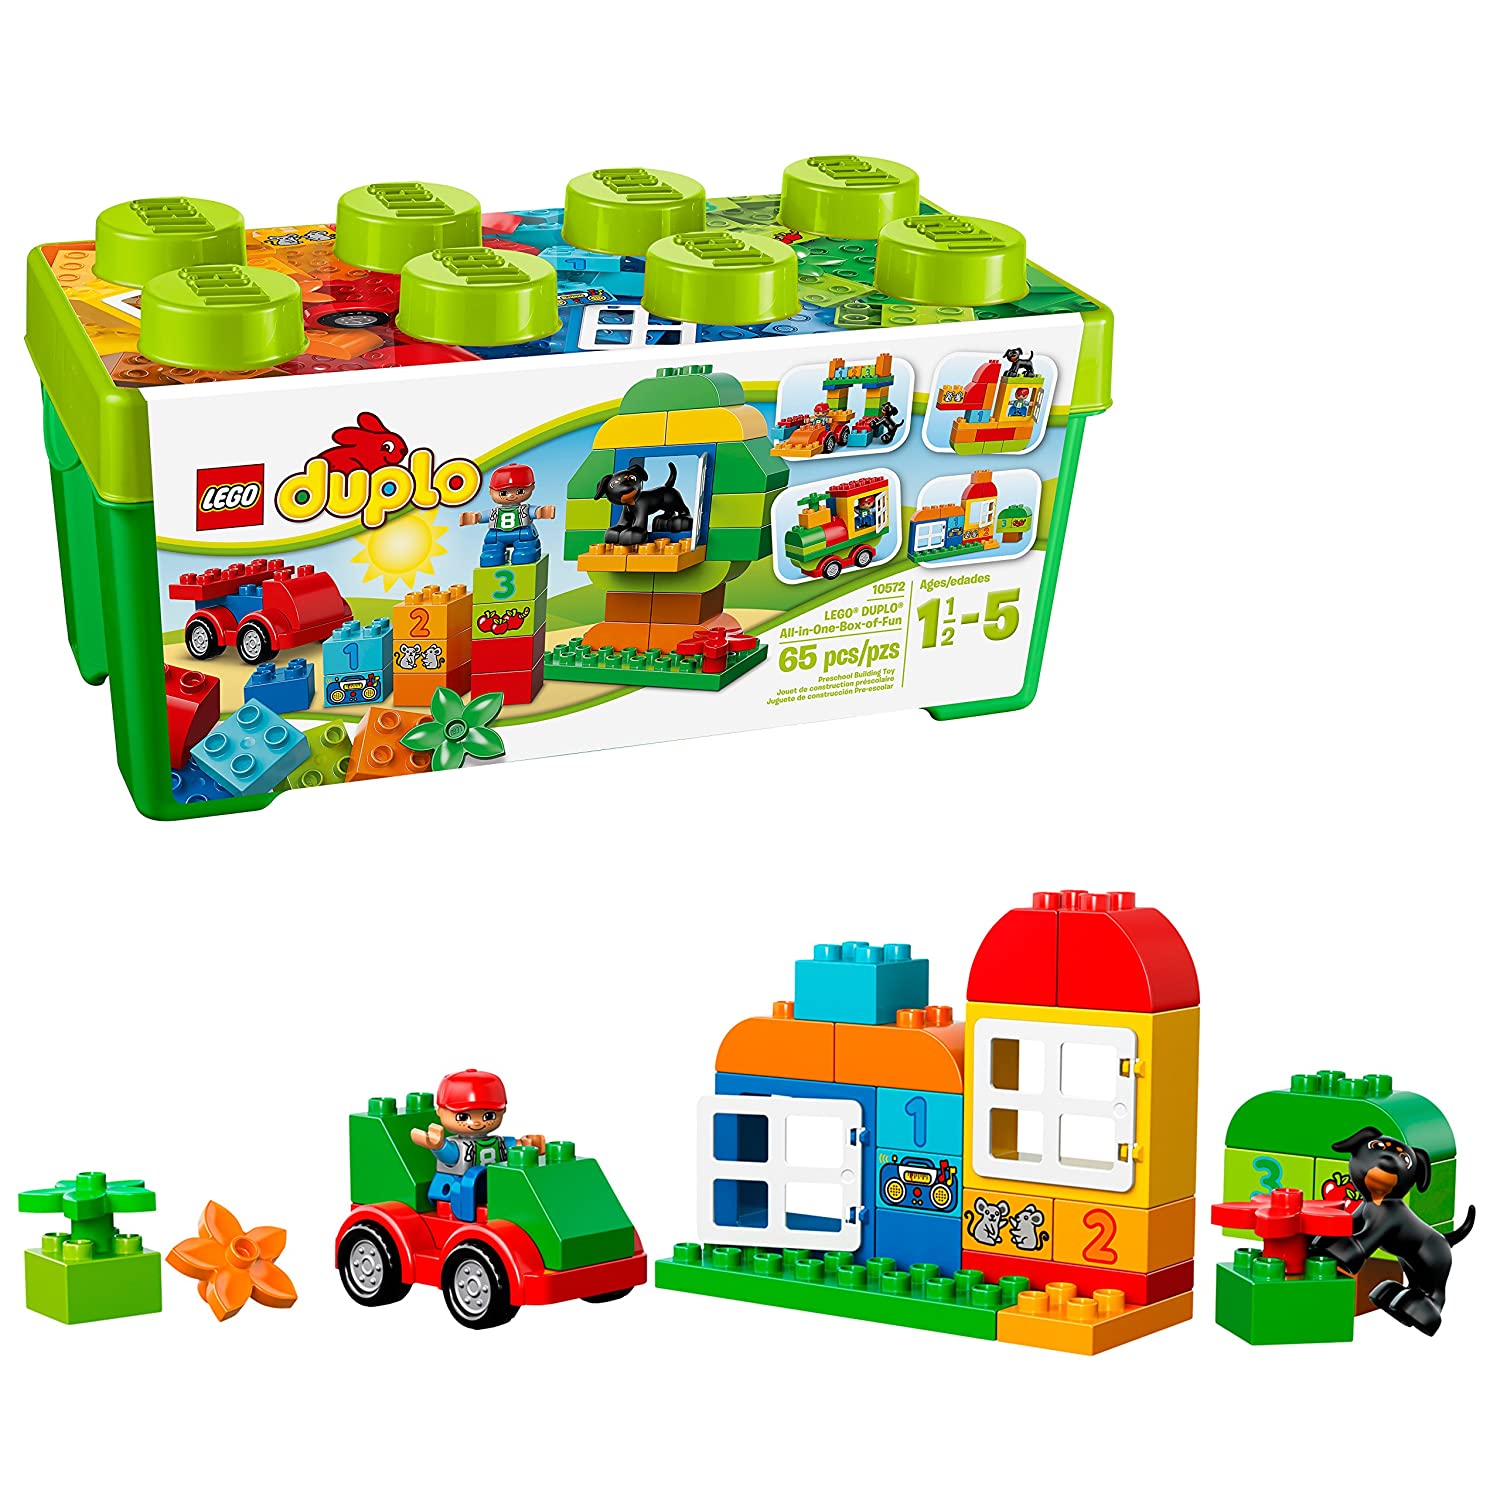 Top 9 Best Lego Duplo Sets Reviews in 2022 3